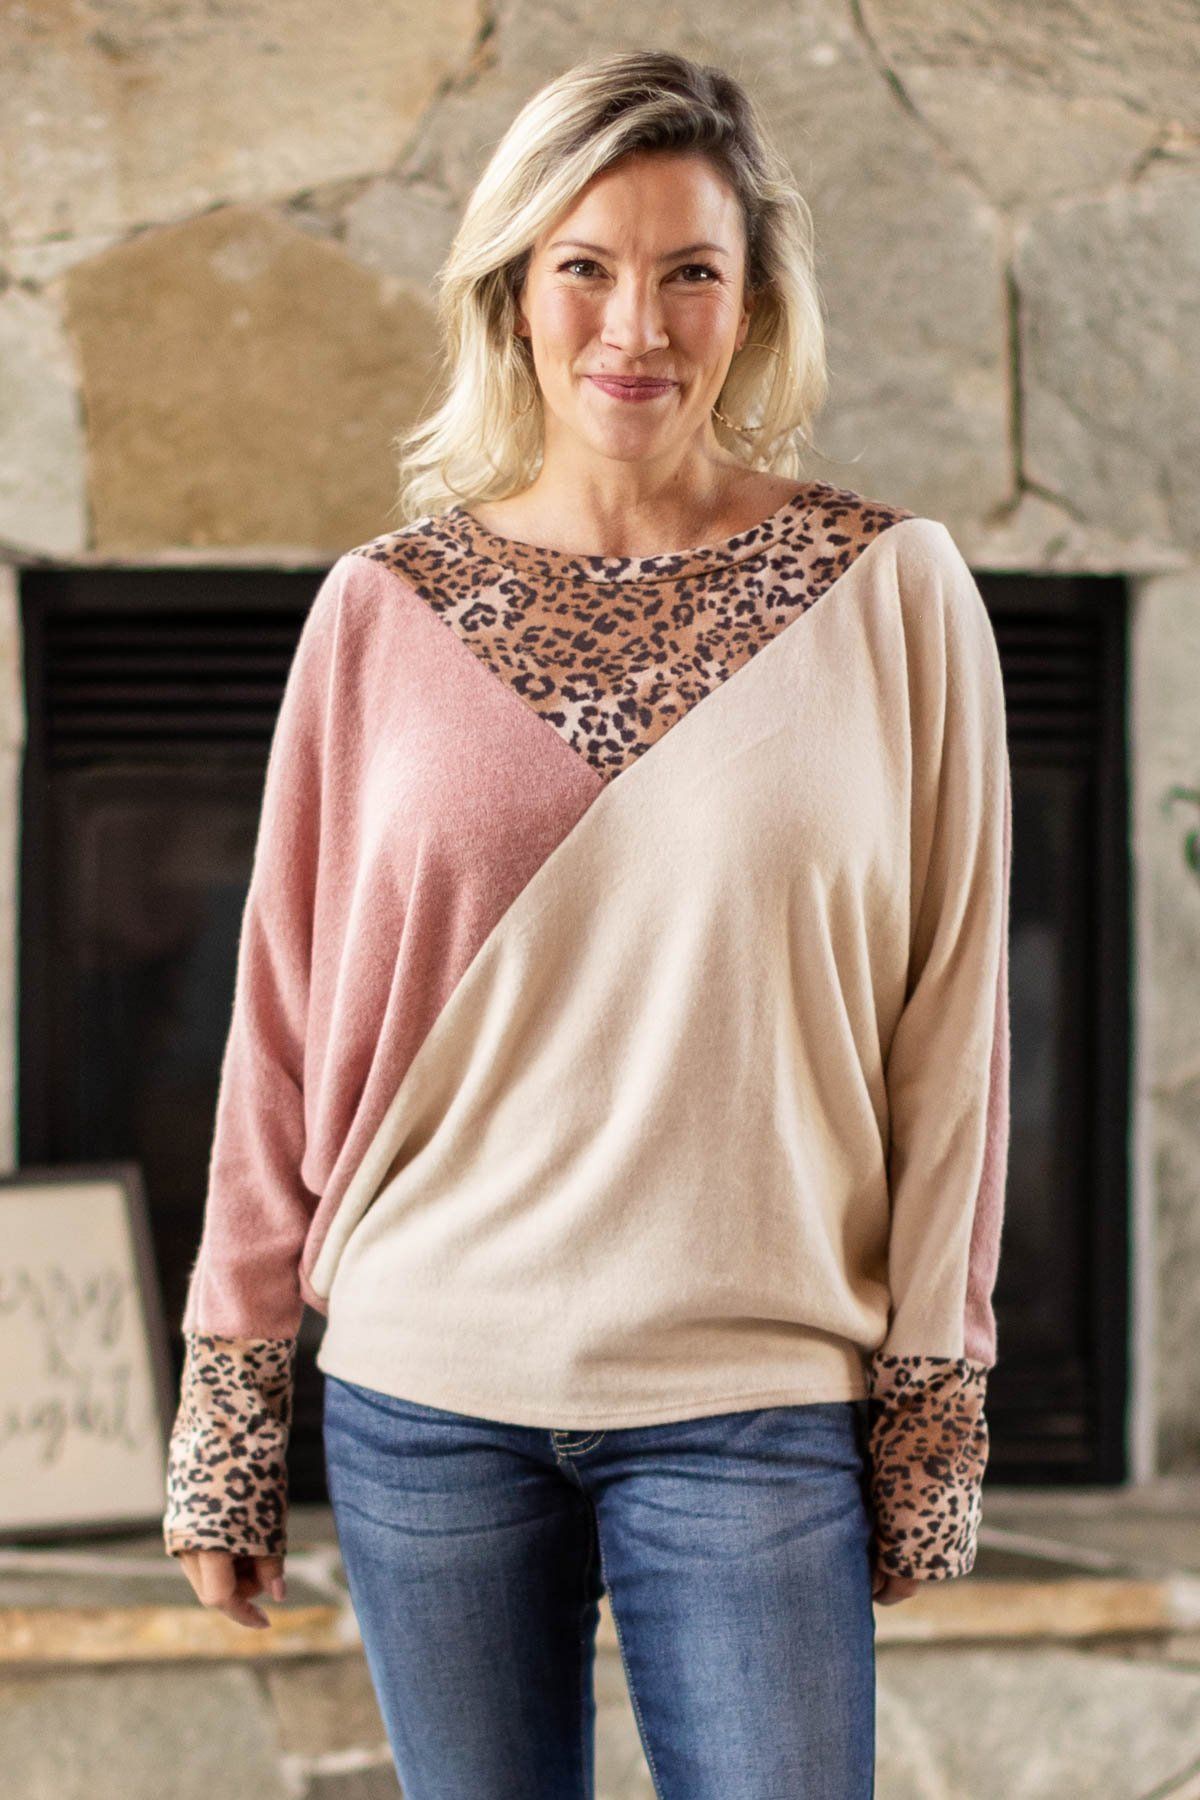 Tan and Mauve Colorblock Top with Animal Print - Filly Flair